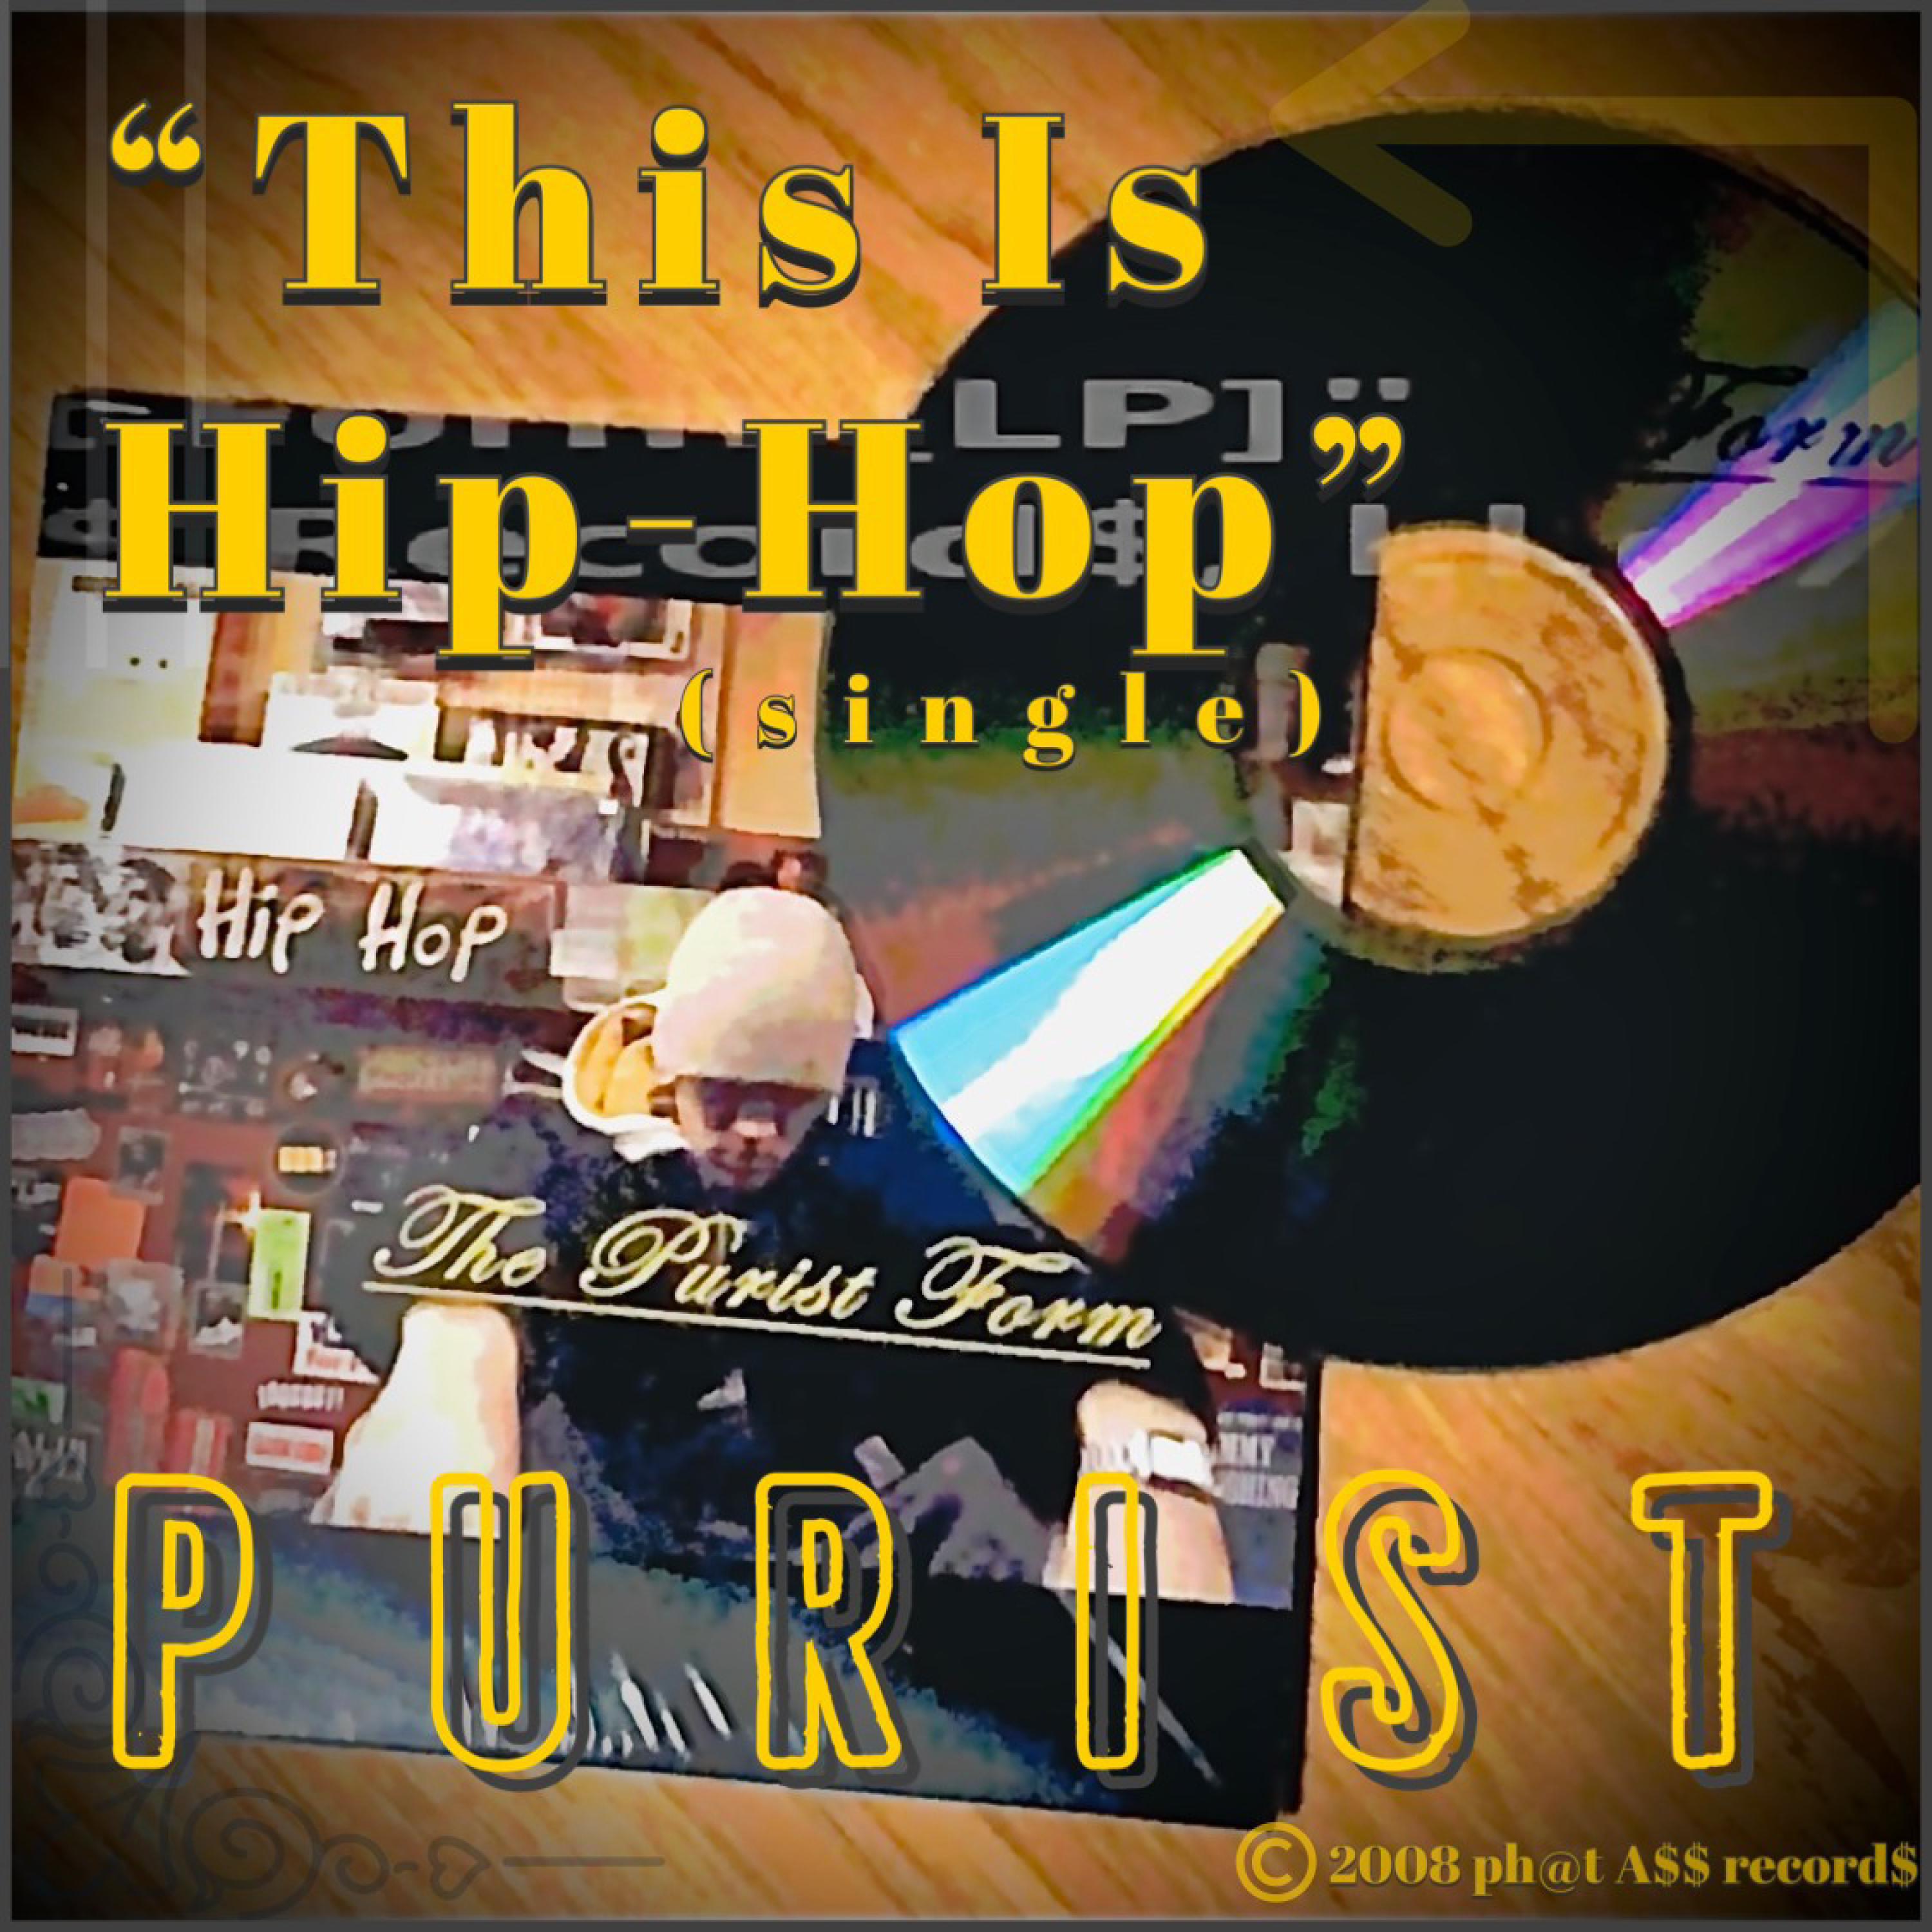 Purist - This Is HipHop